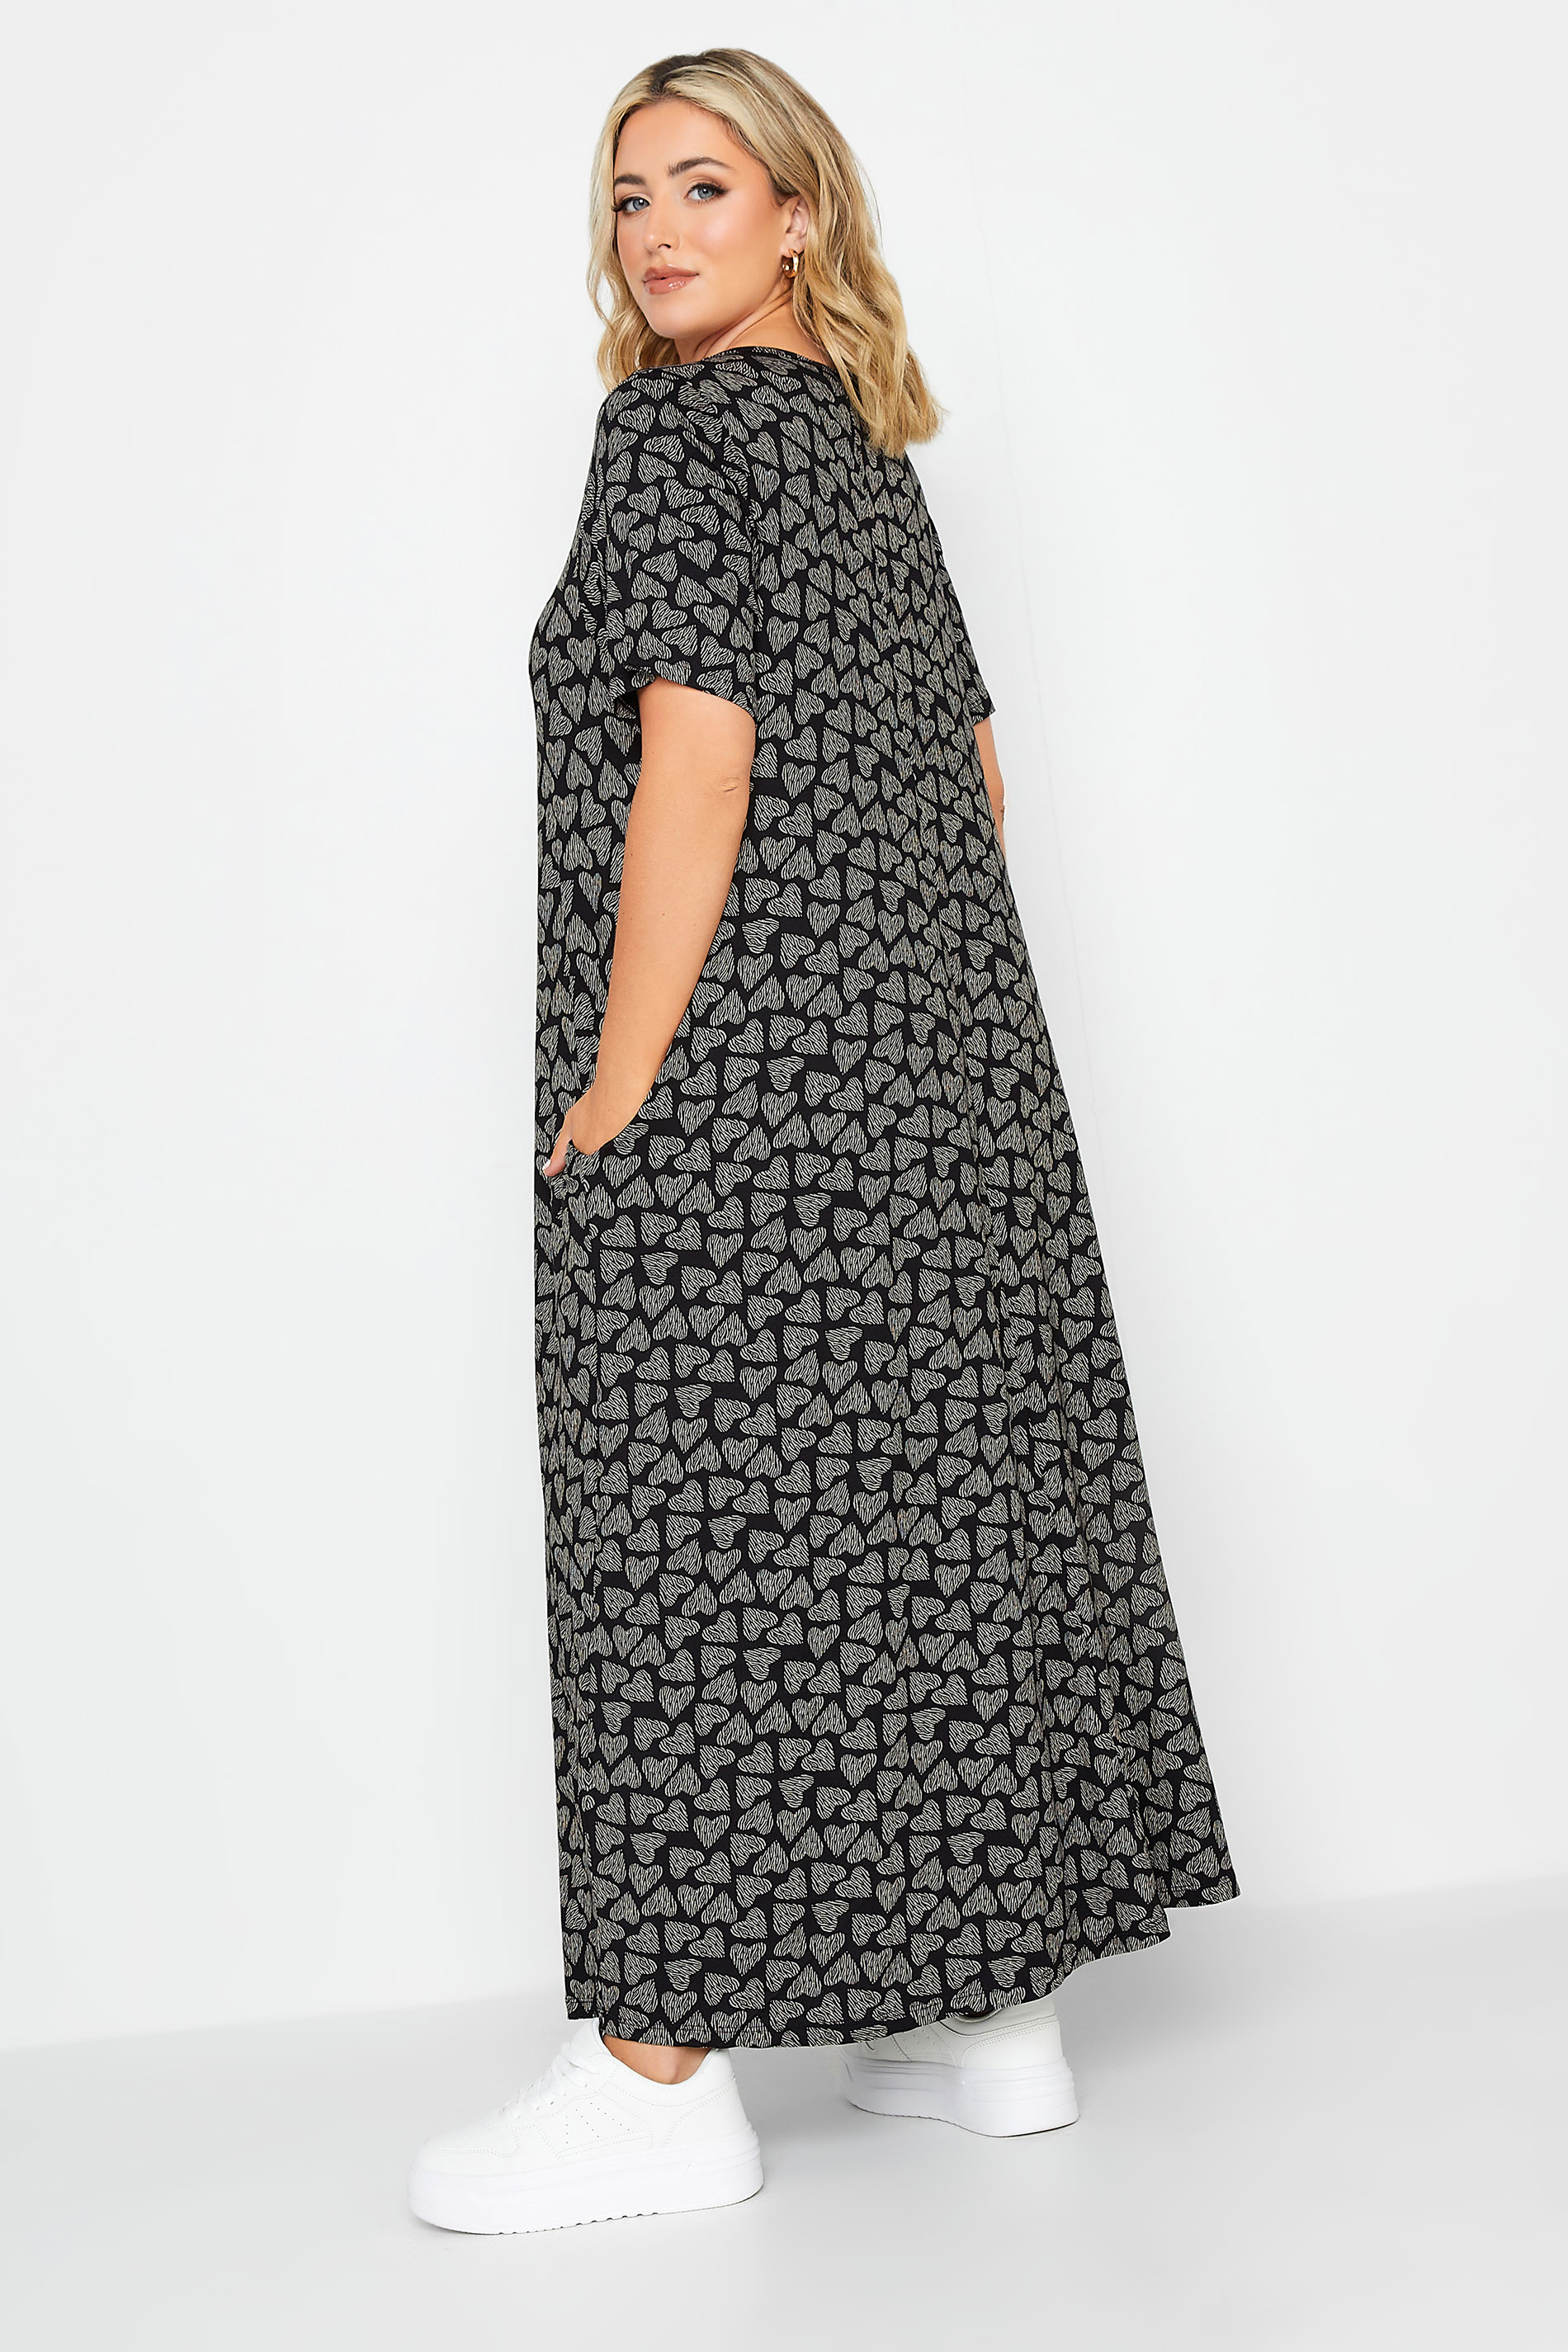 YOURS Plus Size Black Heart Print Maxi Dress | Yours Clothing 3